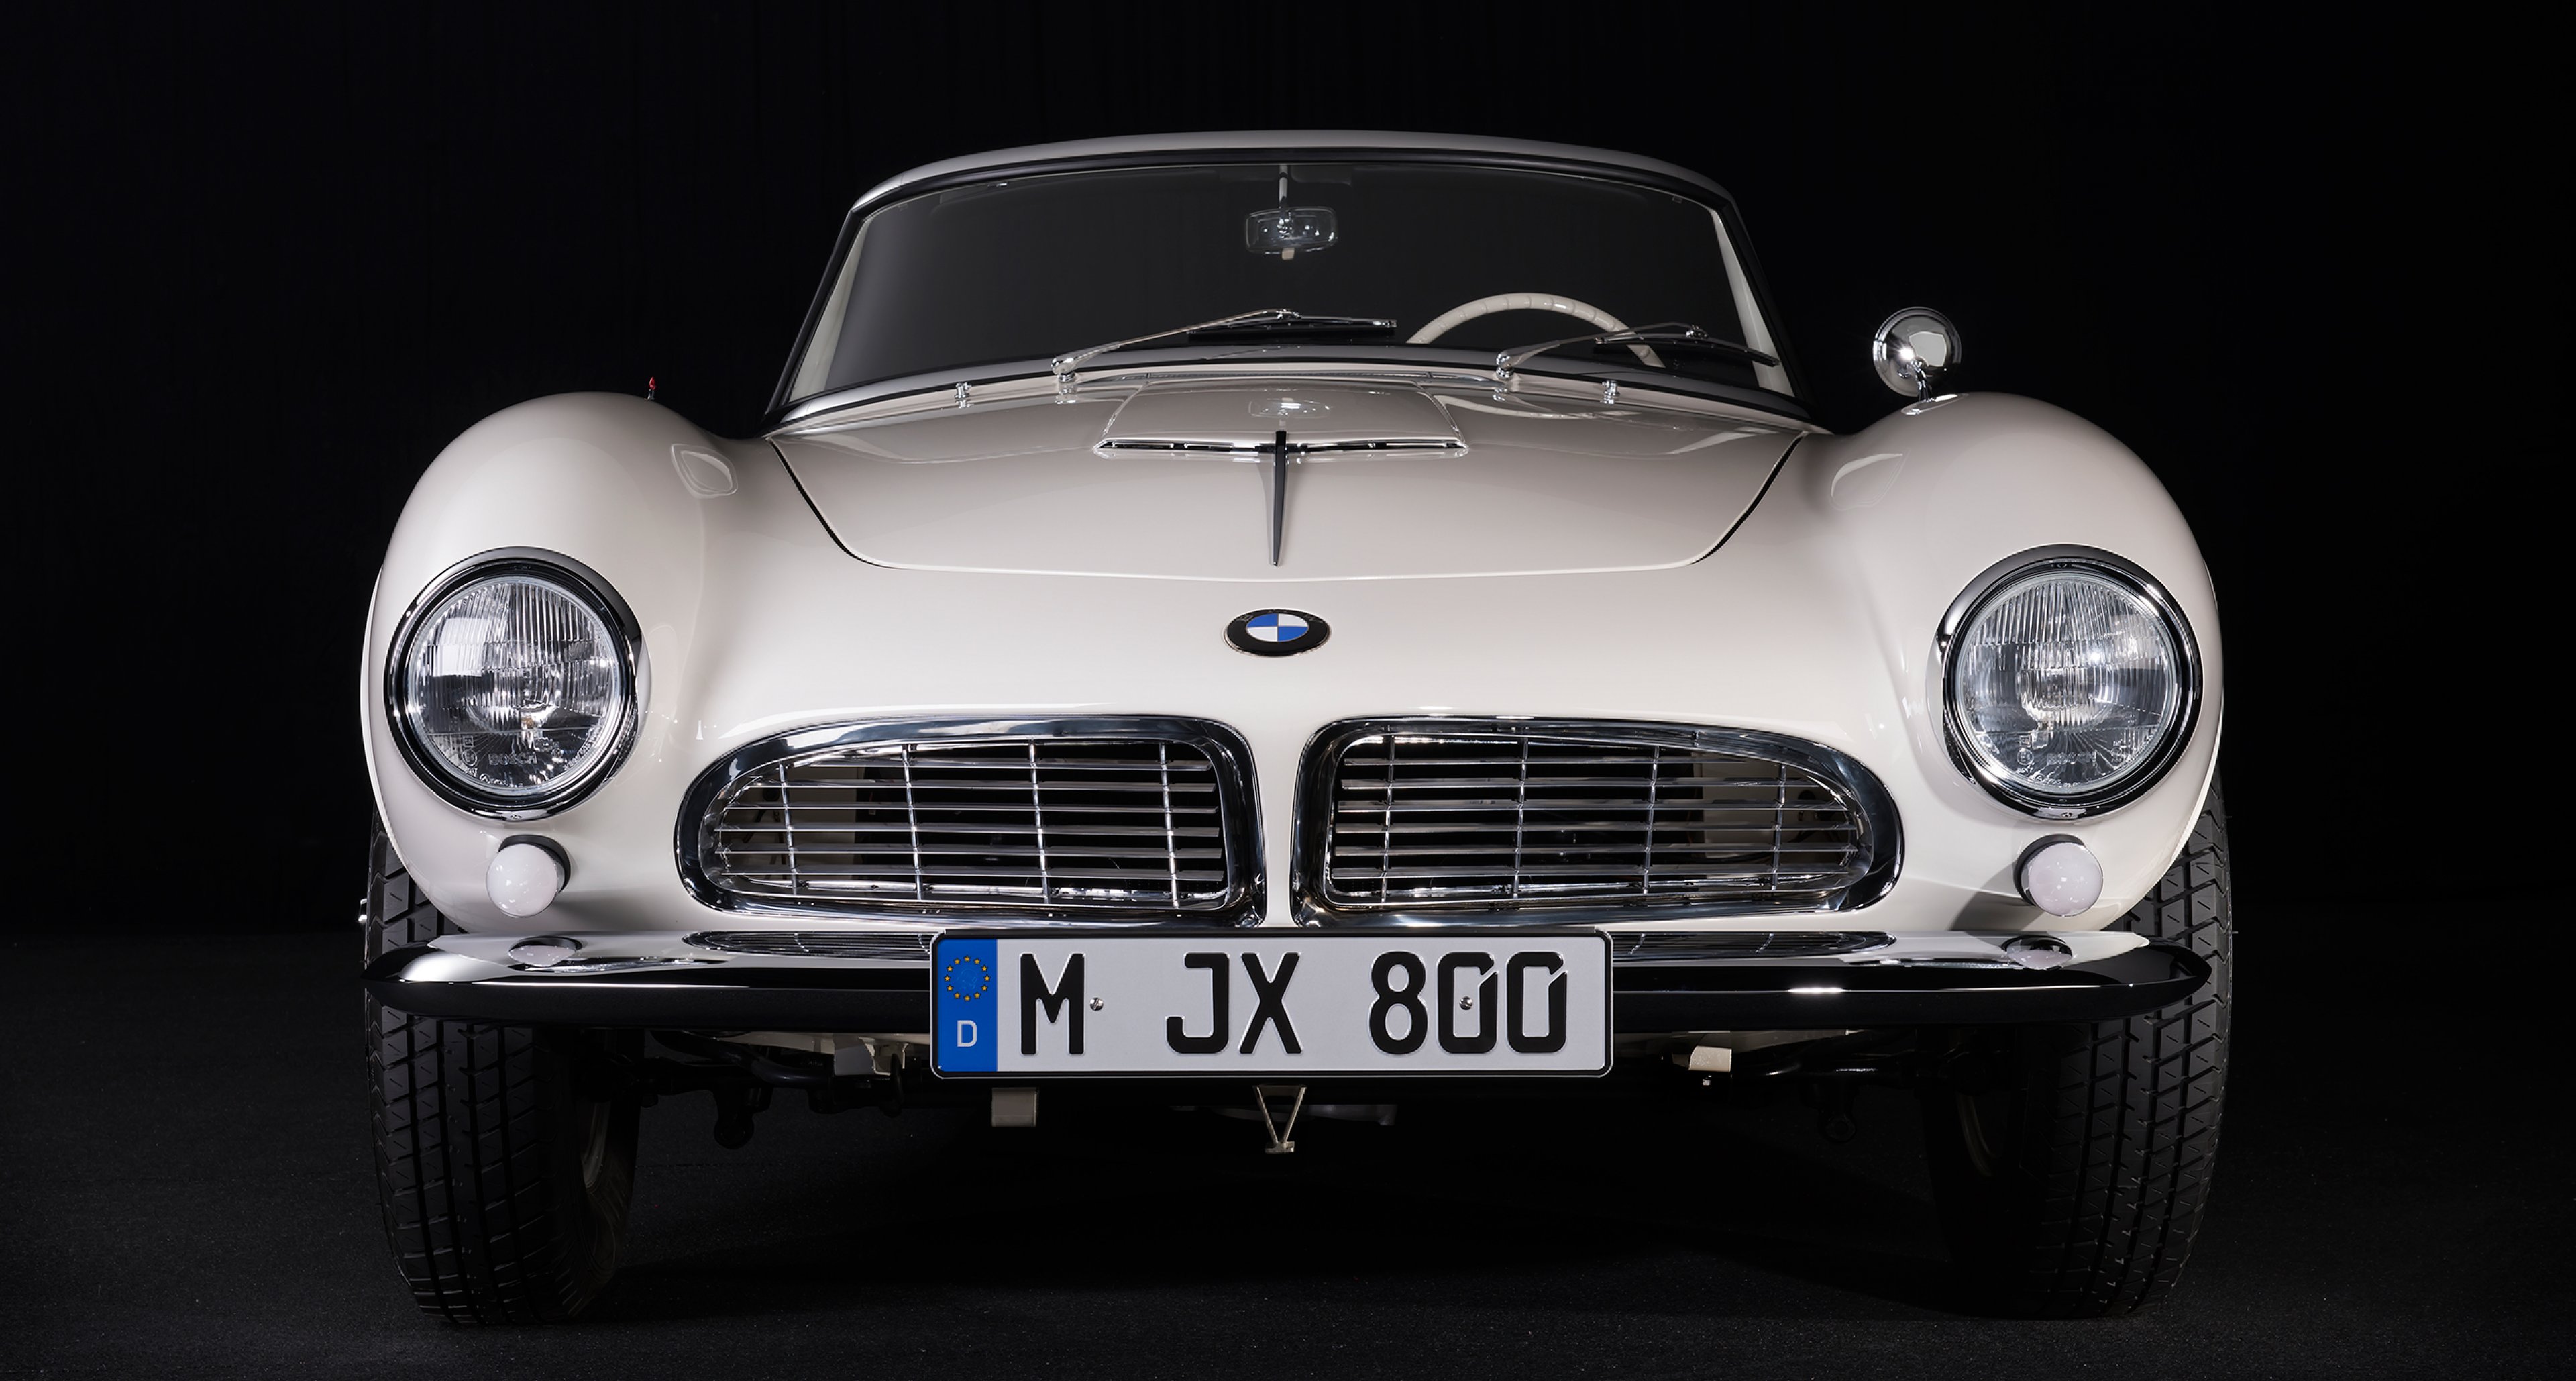 Elvis Lives The Incredible Story Of A Bmw 507 Classic